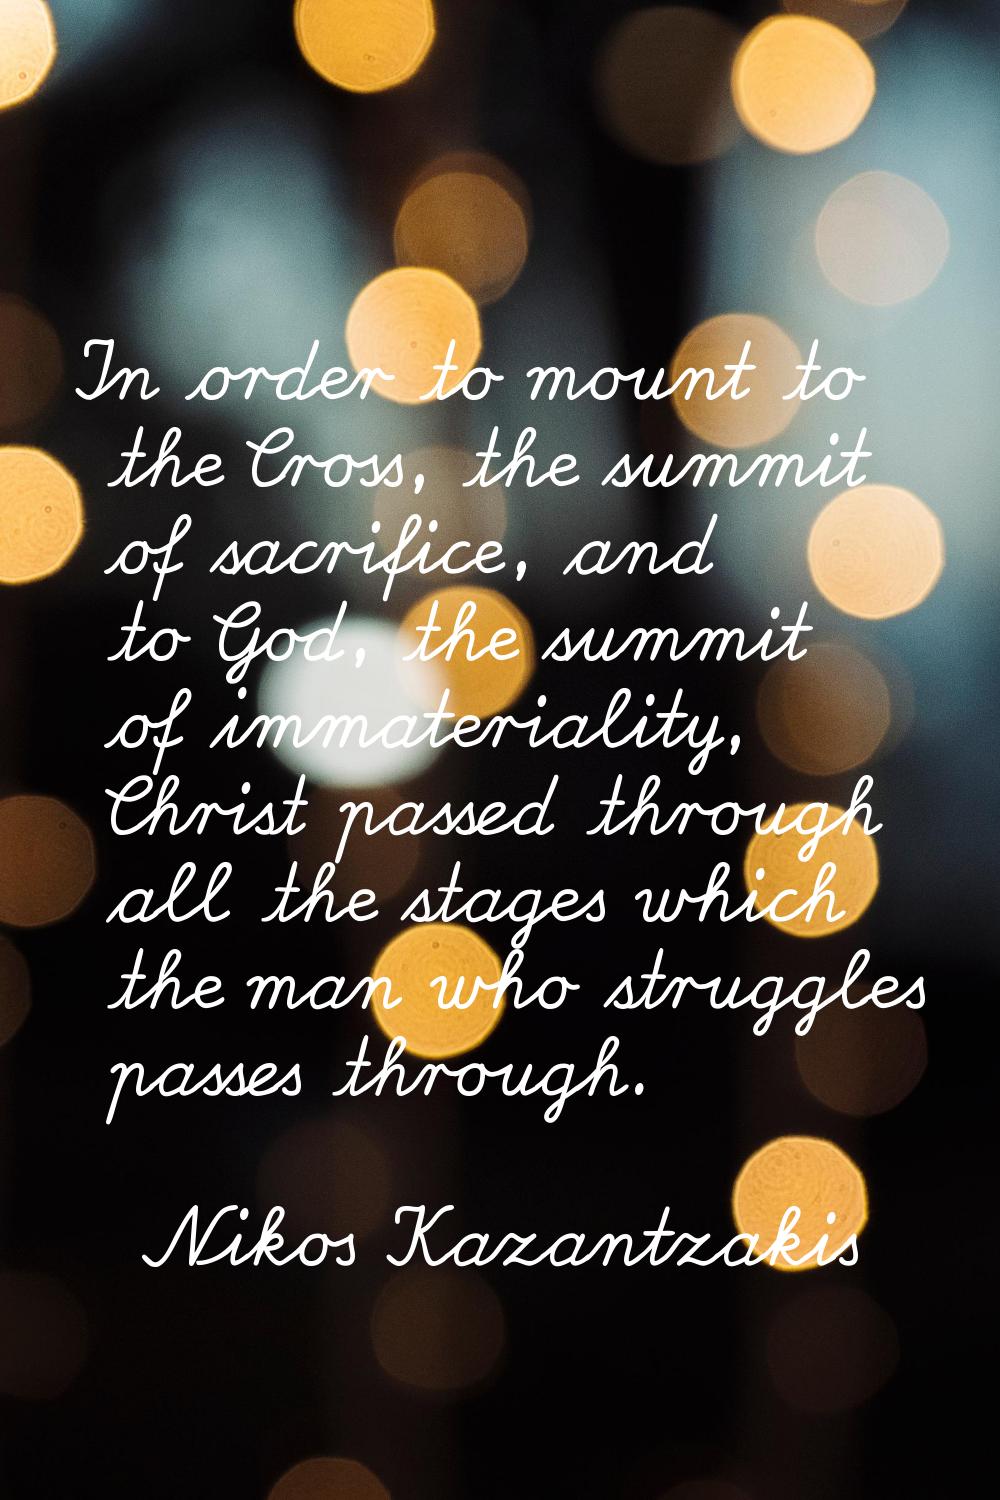 In order to mount to the Cross, the summit of sacrifice, and to God, the summit of immateriality, C